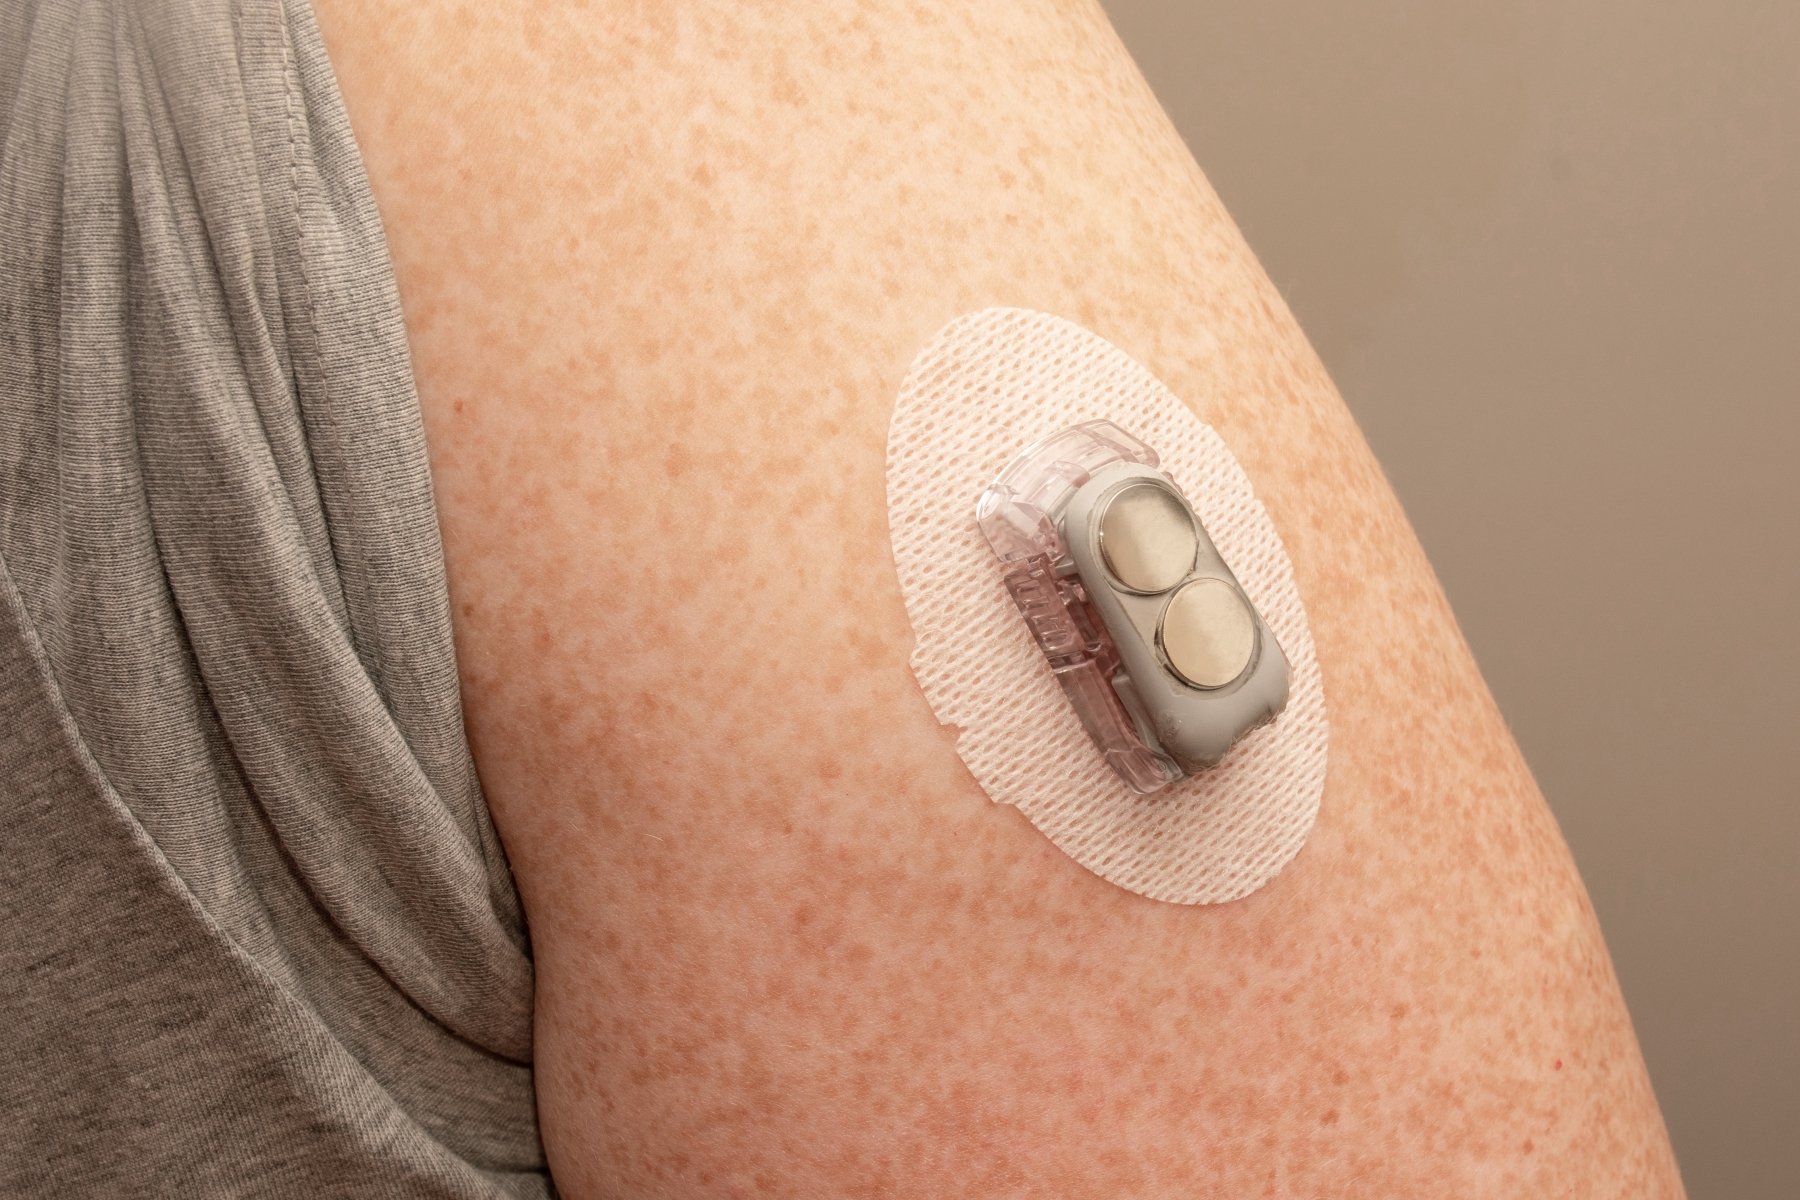 Example of Dymax 2022-MW medical wearables adhesive used for continuous glucose monitoring